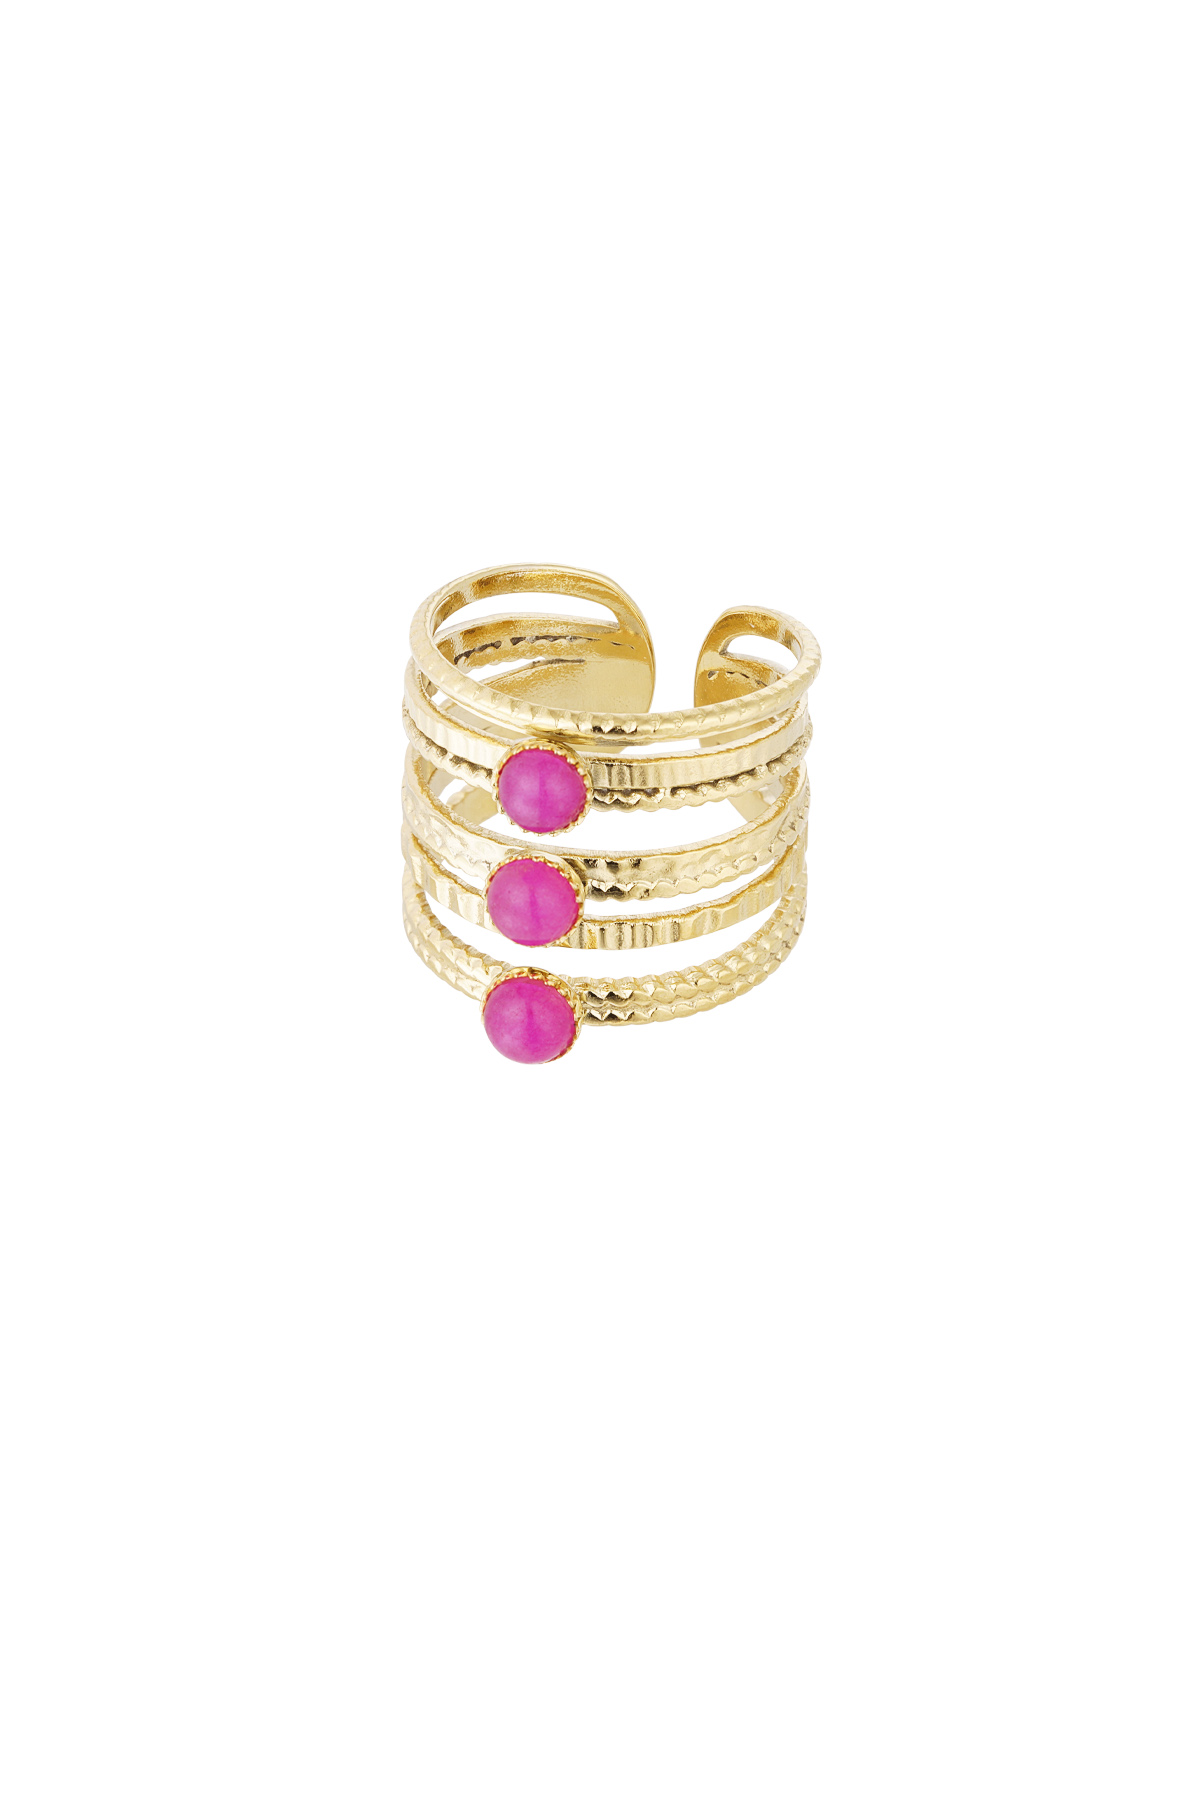 Bague pierre trois couches - or/rose